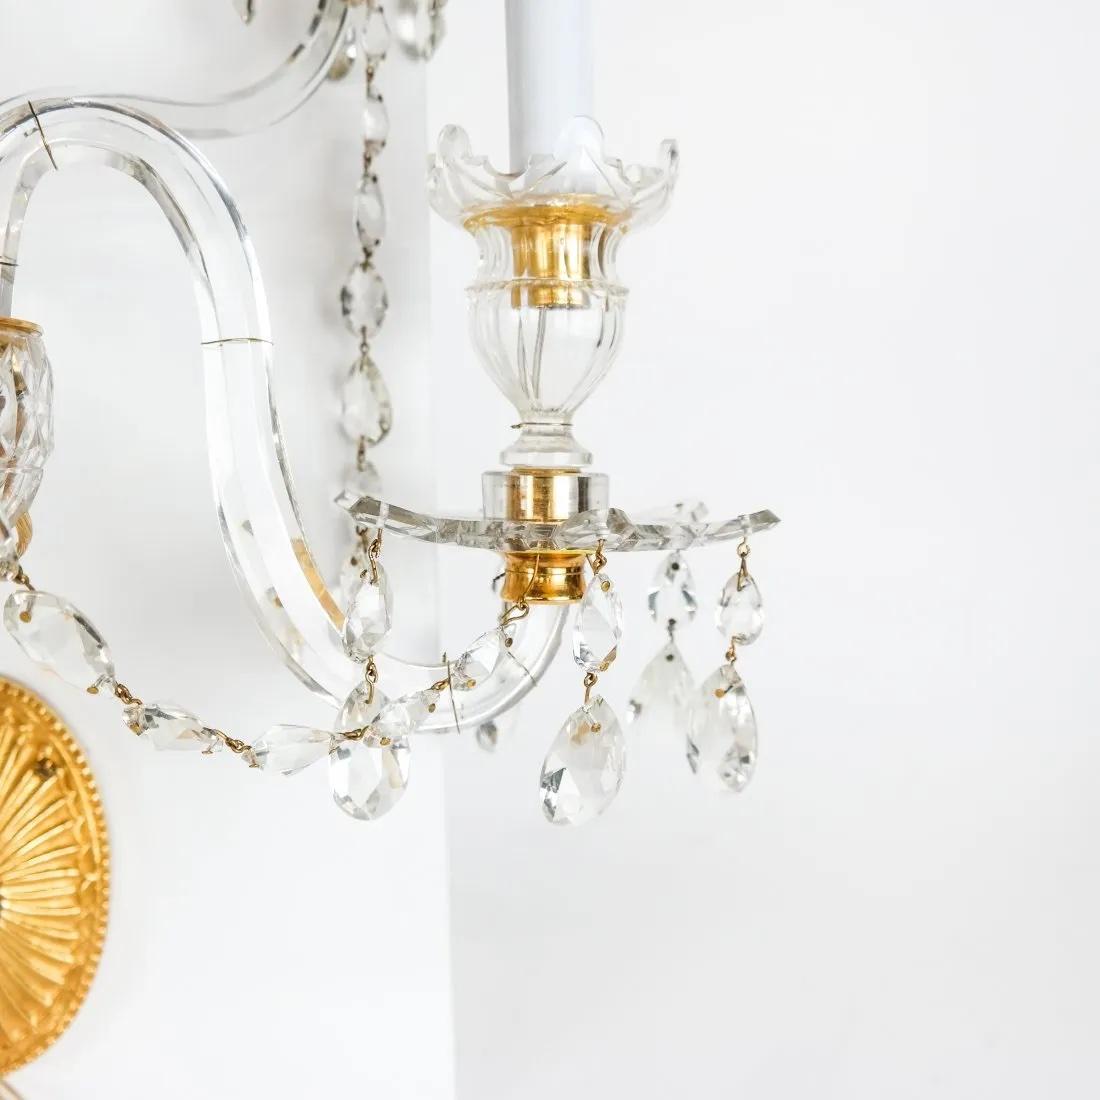 Pair of George III Style Cut Crystal and Ormolu Wall Sconces In Good Condition For Sale In Essex, MA